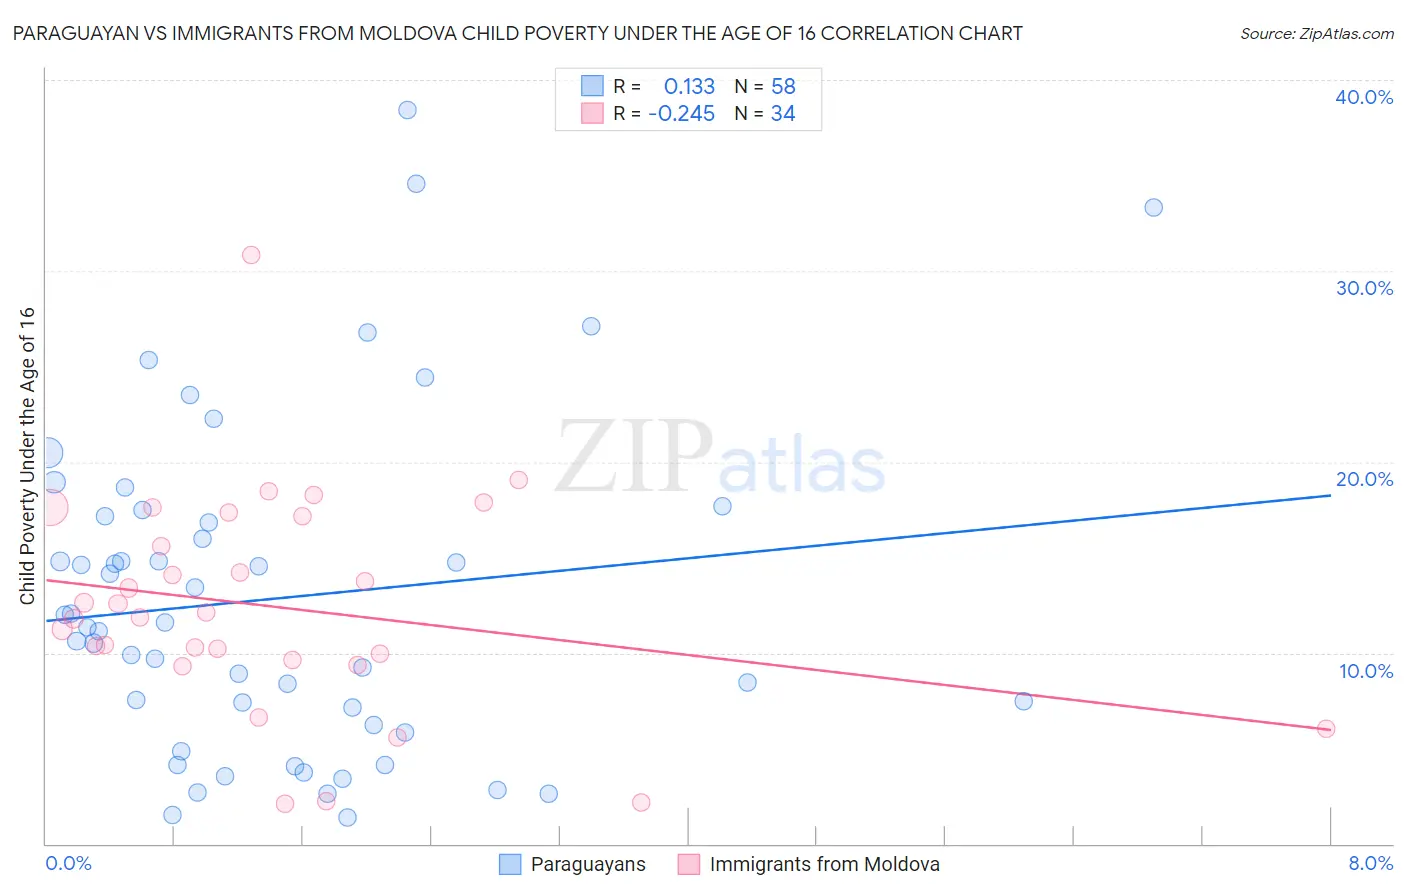 Paraguayan vs Immigrants from Moldova Child Poverty Under the Age of 16